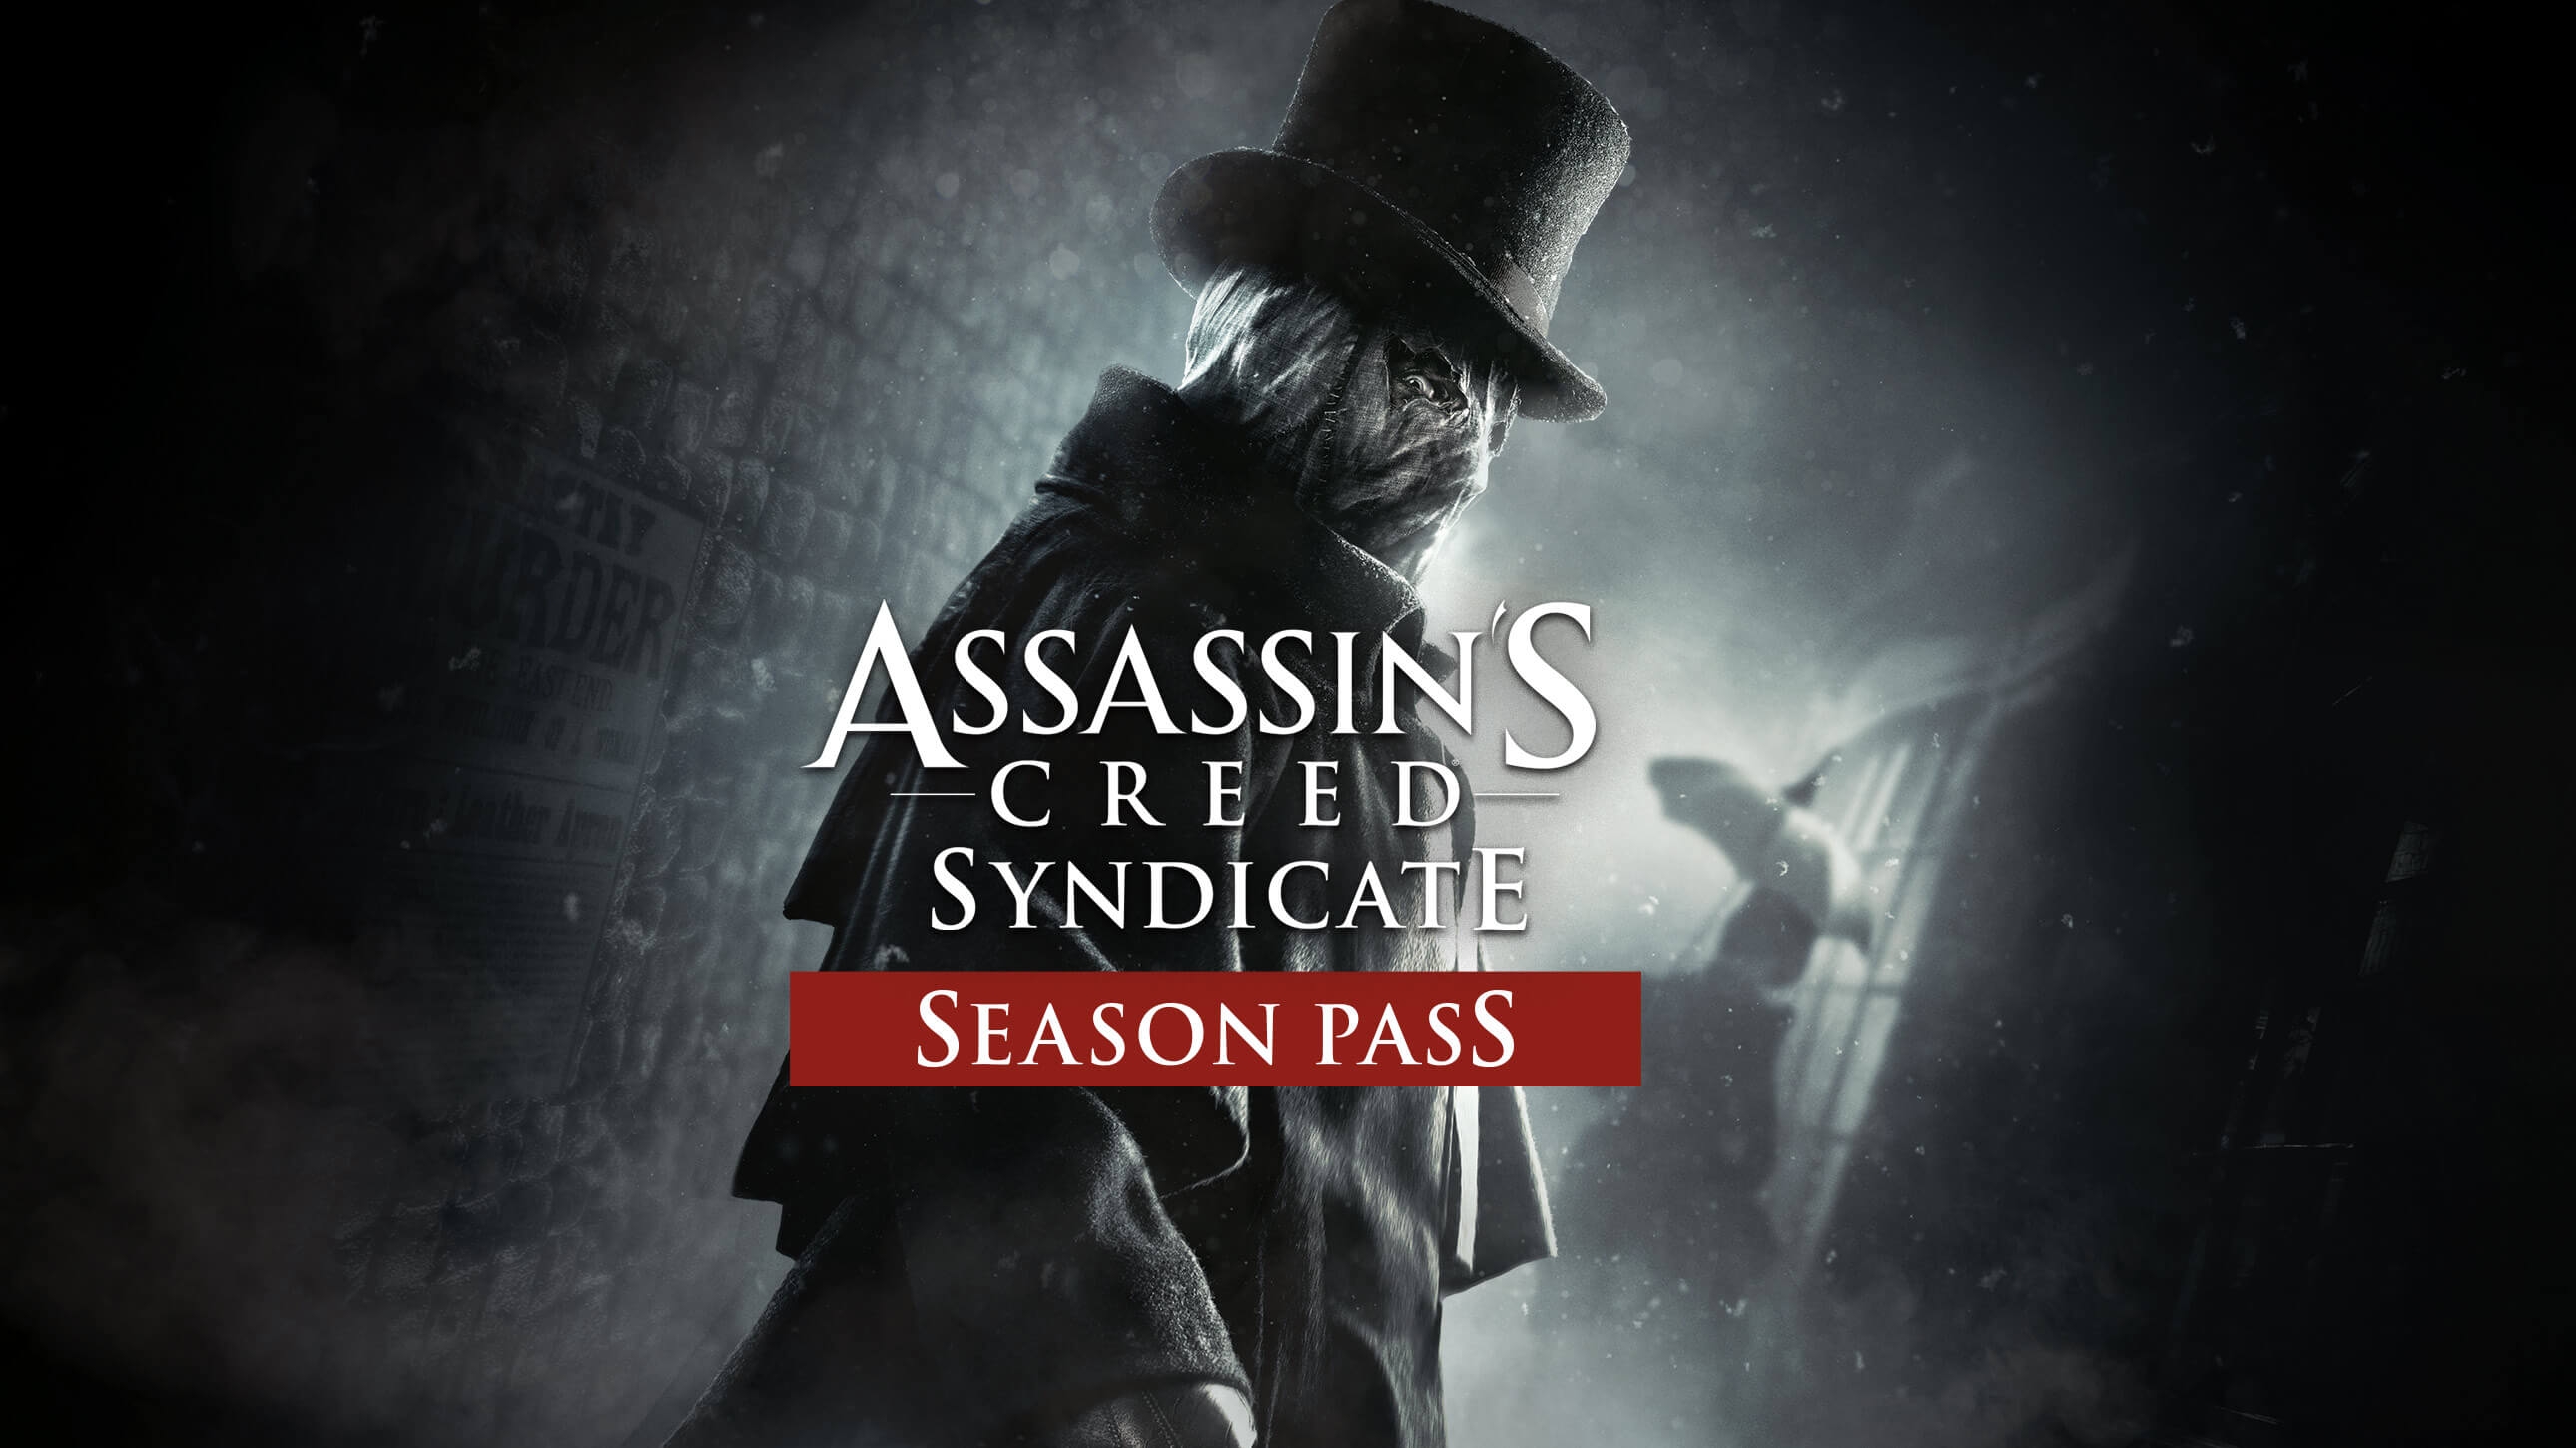 Assassin's Creed Syndicate, PC Ubisoft Connect Game